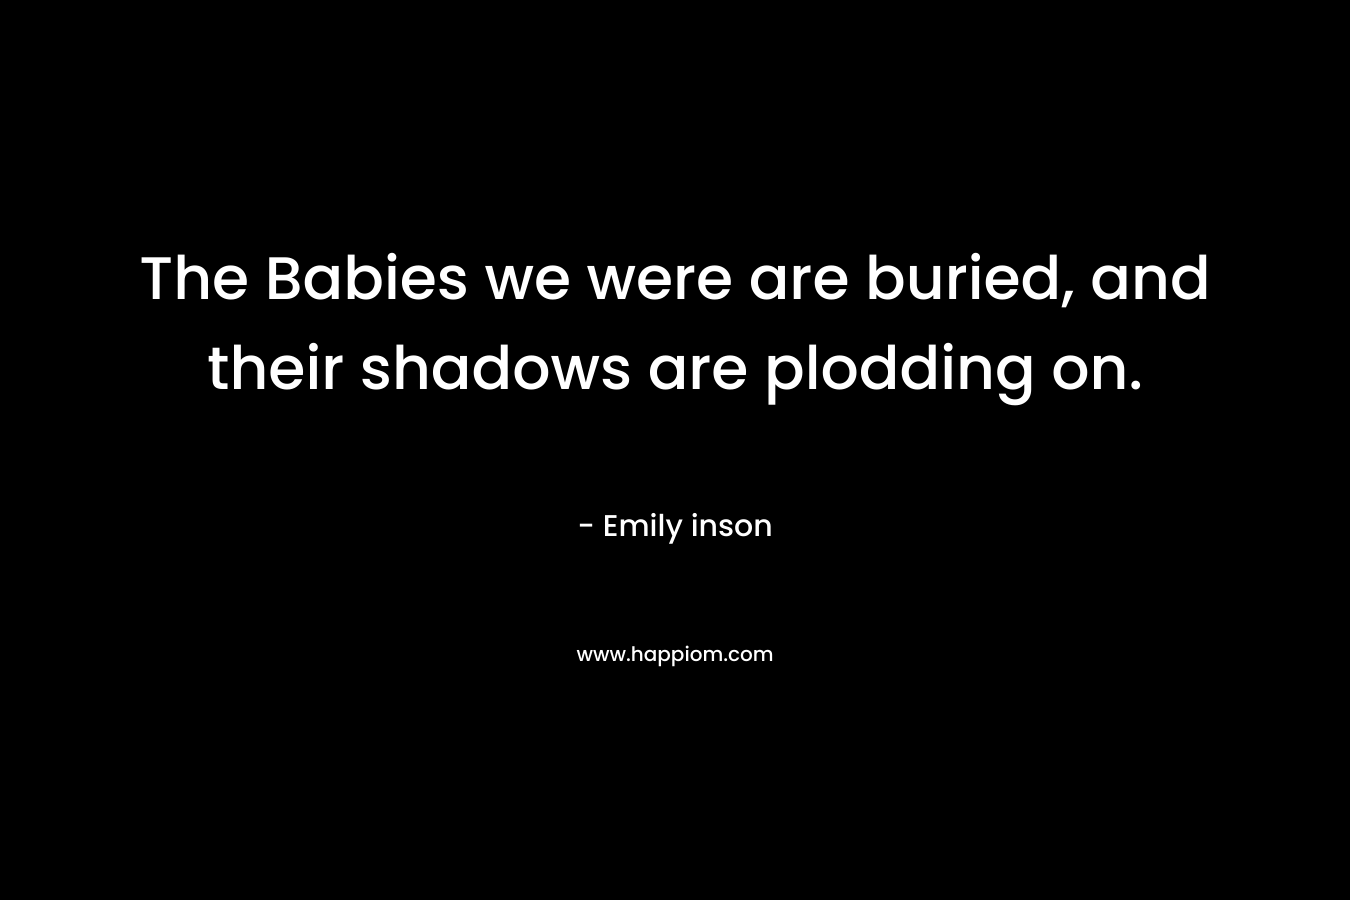 The Babies we were are buried, and their shadows are plodding on. – Emily inson